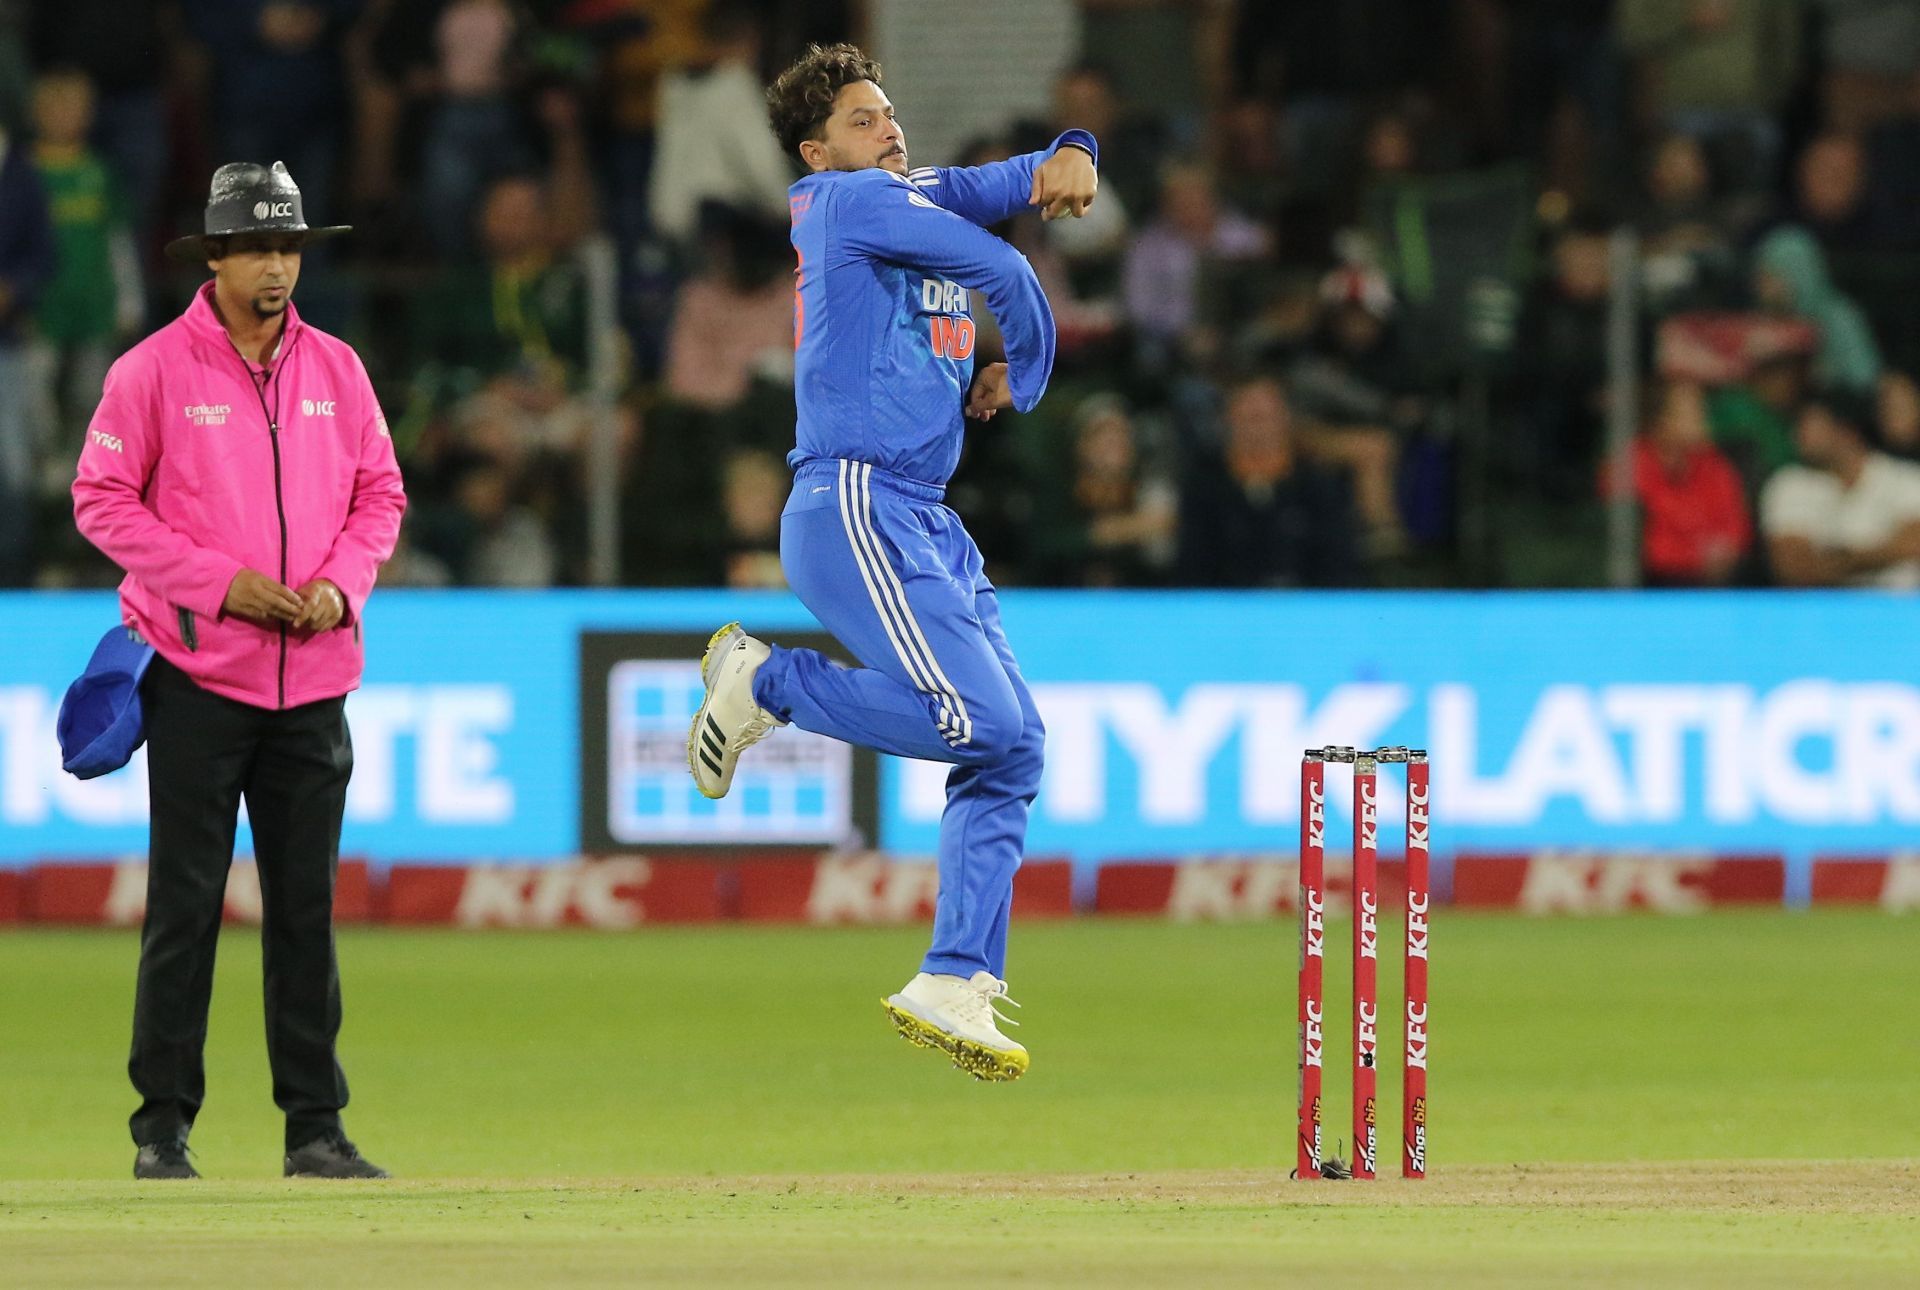 Kuldeep Yadav has an excellent T20I record. (Image Credit: Getty Images)